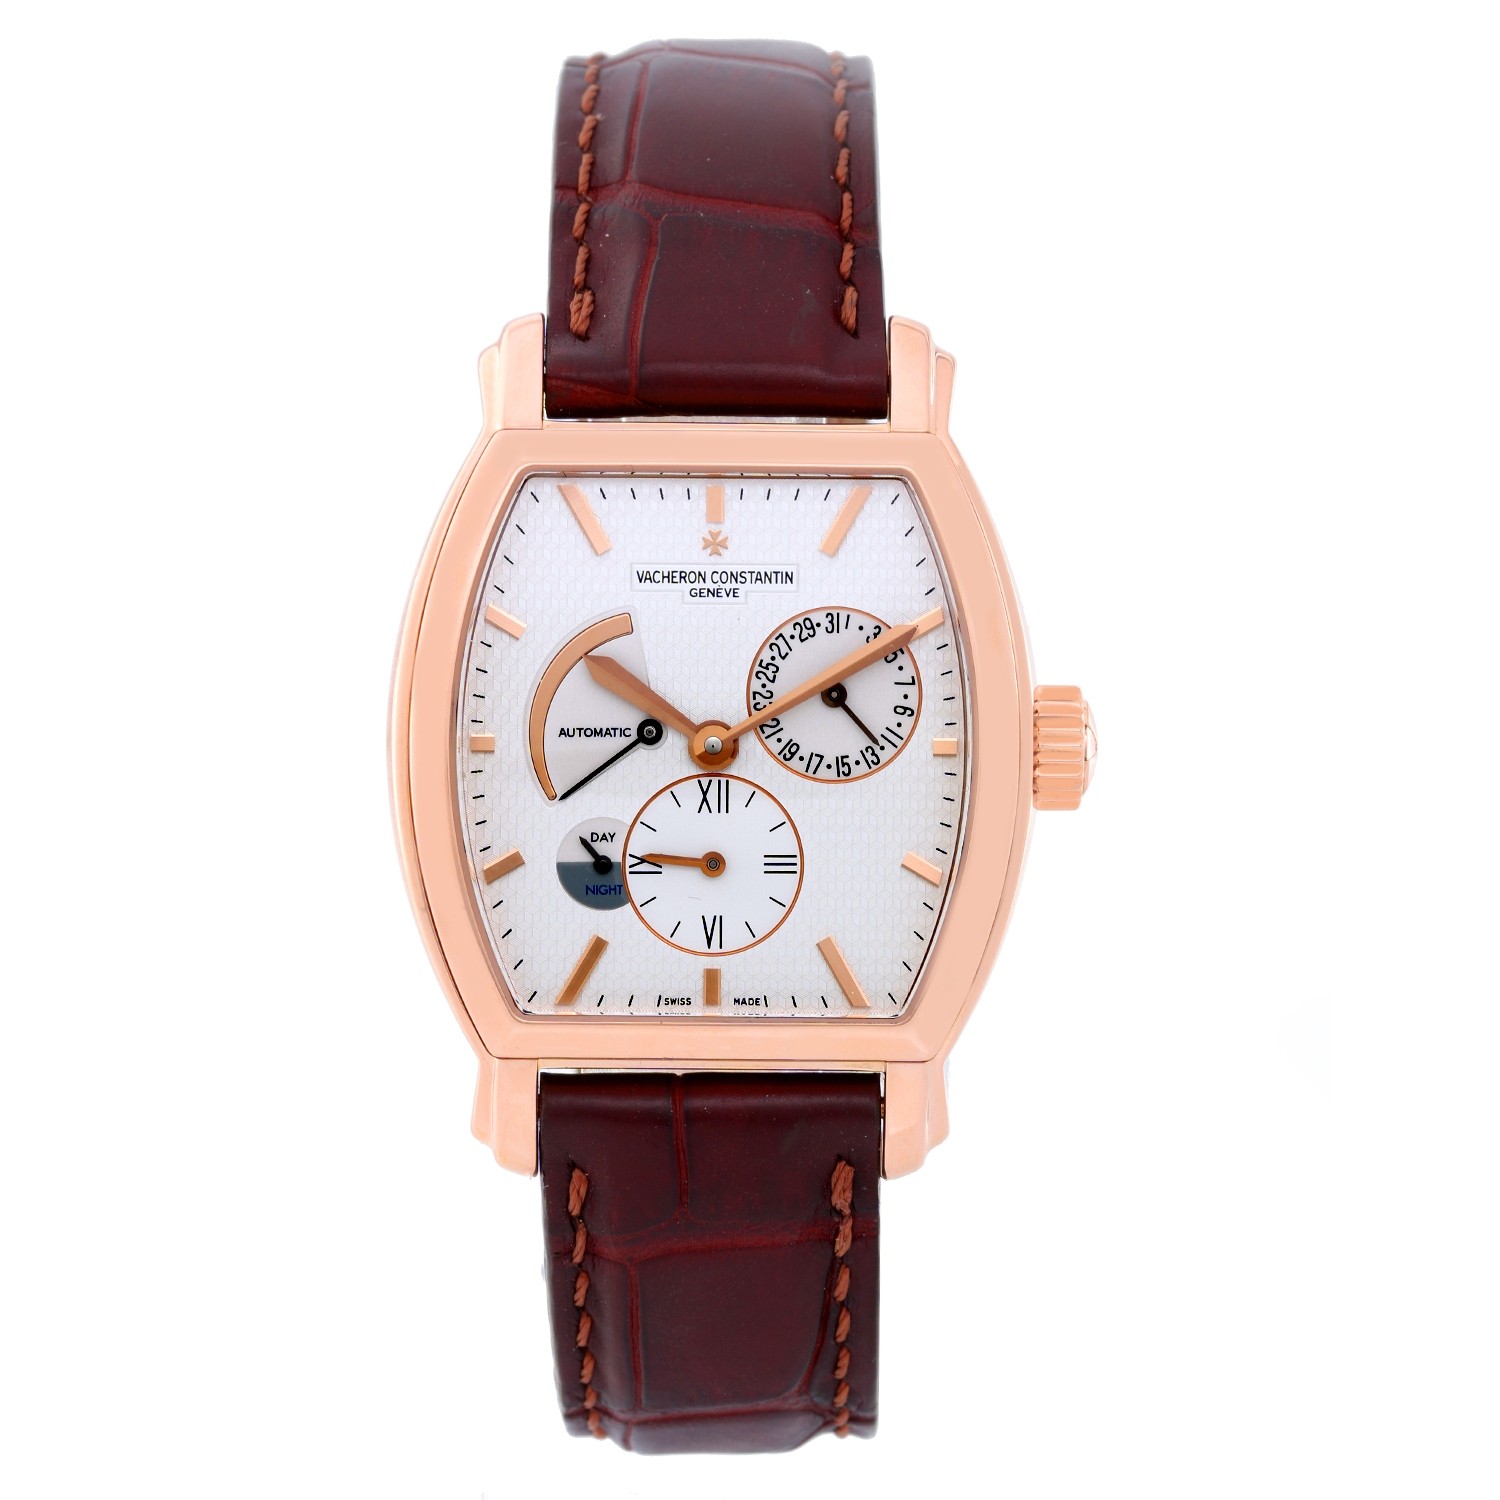 Royal Eagle Power Reserve Dual Time in Rose Gold on Dark Brown Alligator Strap with Silver Dial